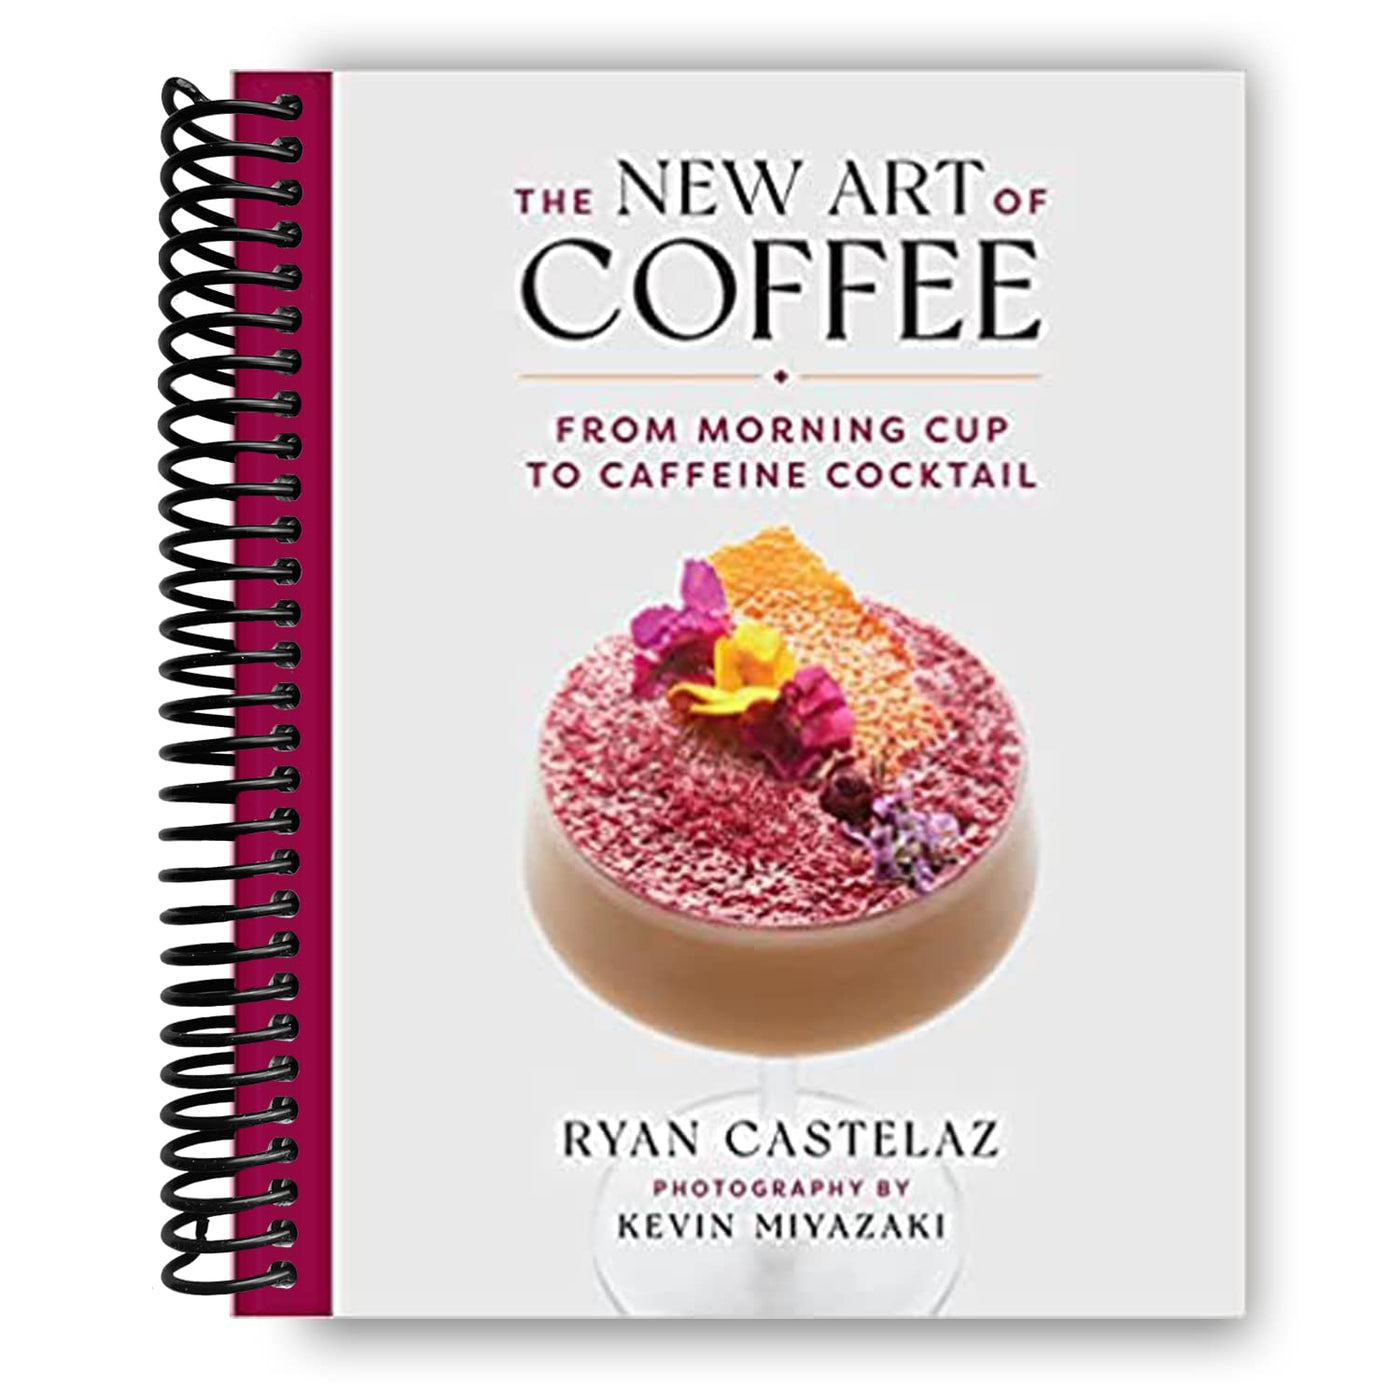 The New Art of Coffee: From Morning Cup to Caffeine Cocktail (Spiral Bound)